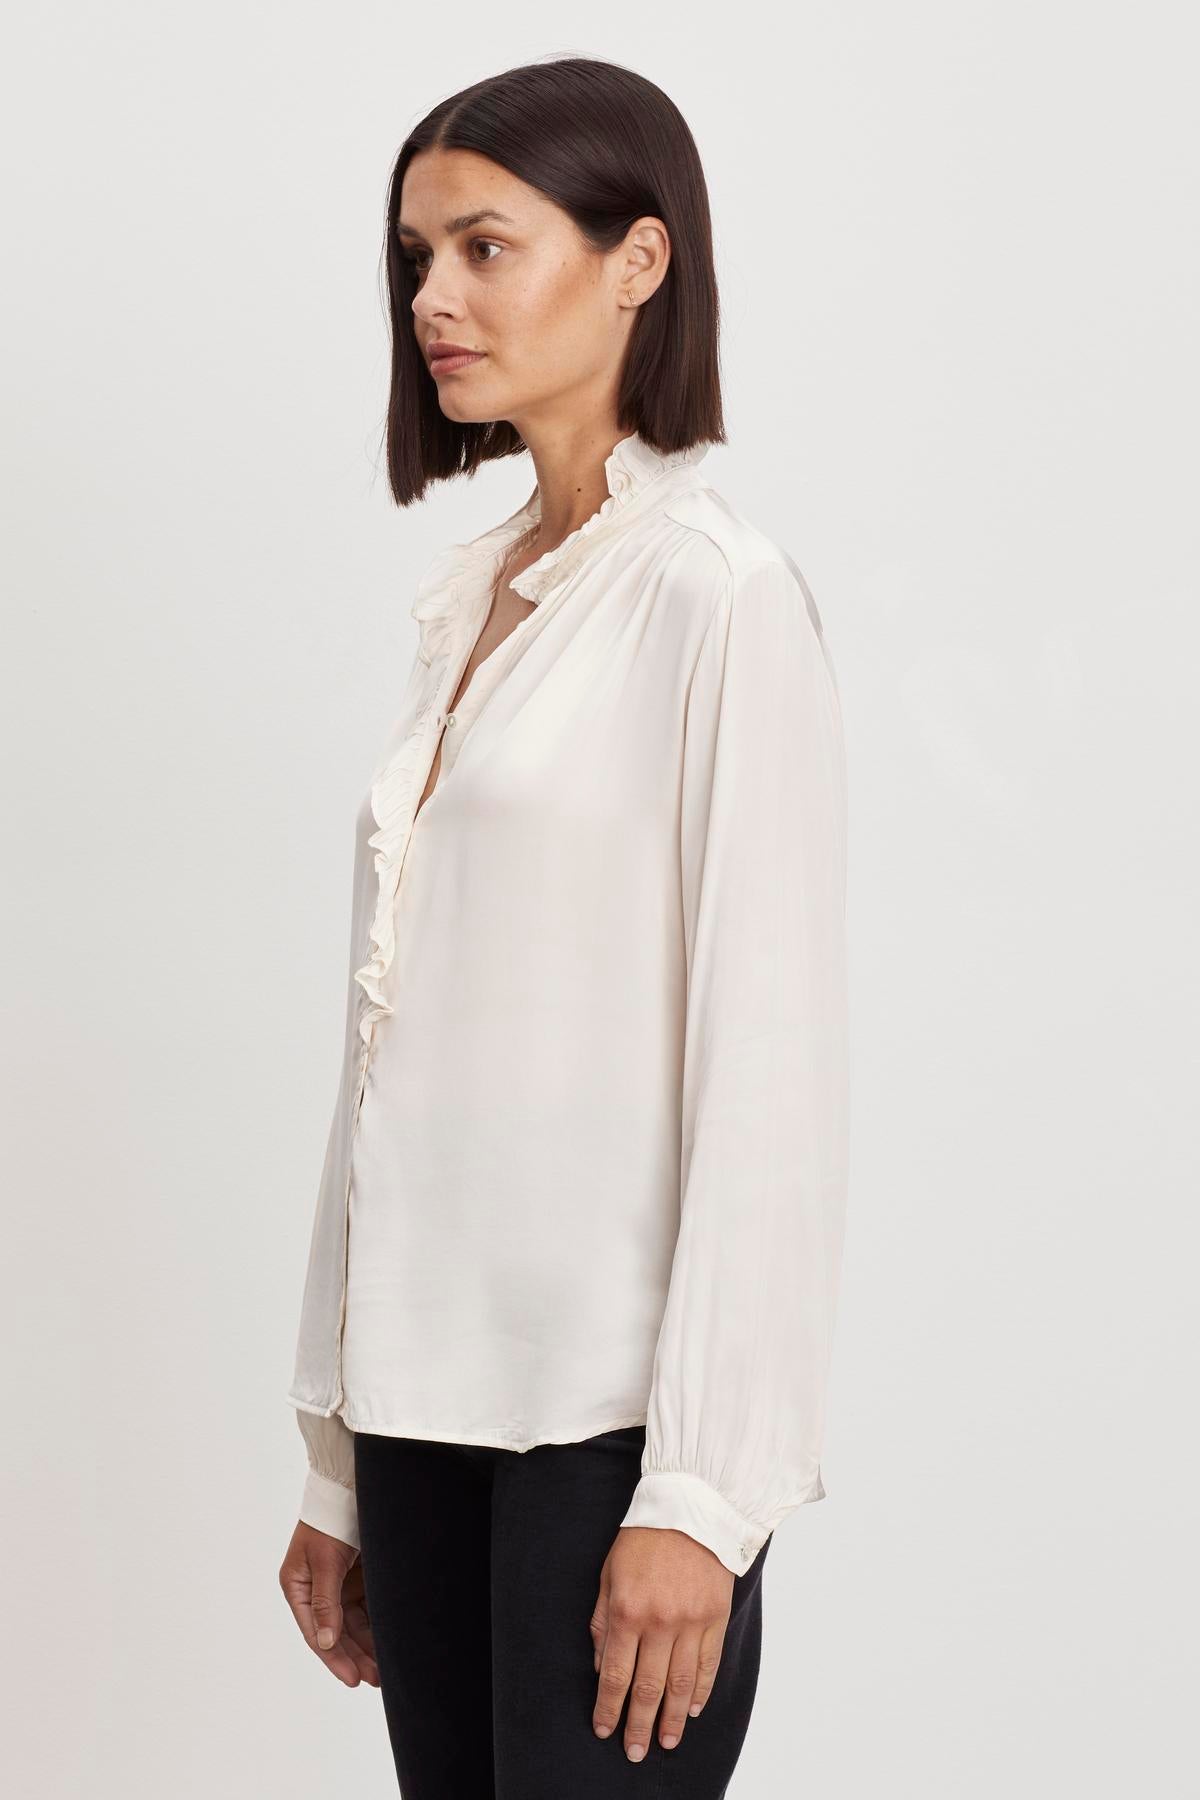 The model is wearing a Velvet by Graham & Spencer ALI BUTTON FRONT BLOUSE with ruffles on the neckline.-36220810526913